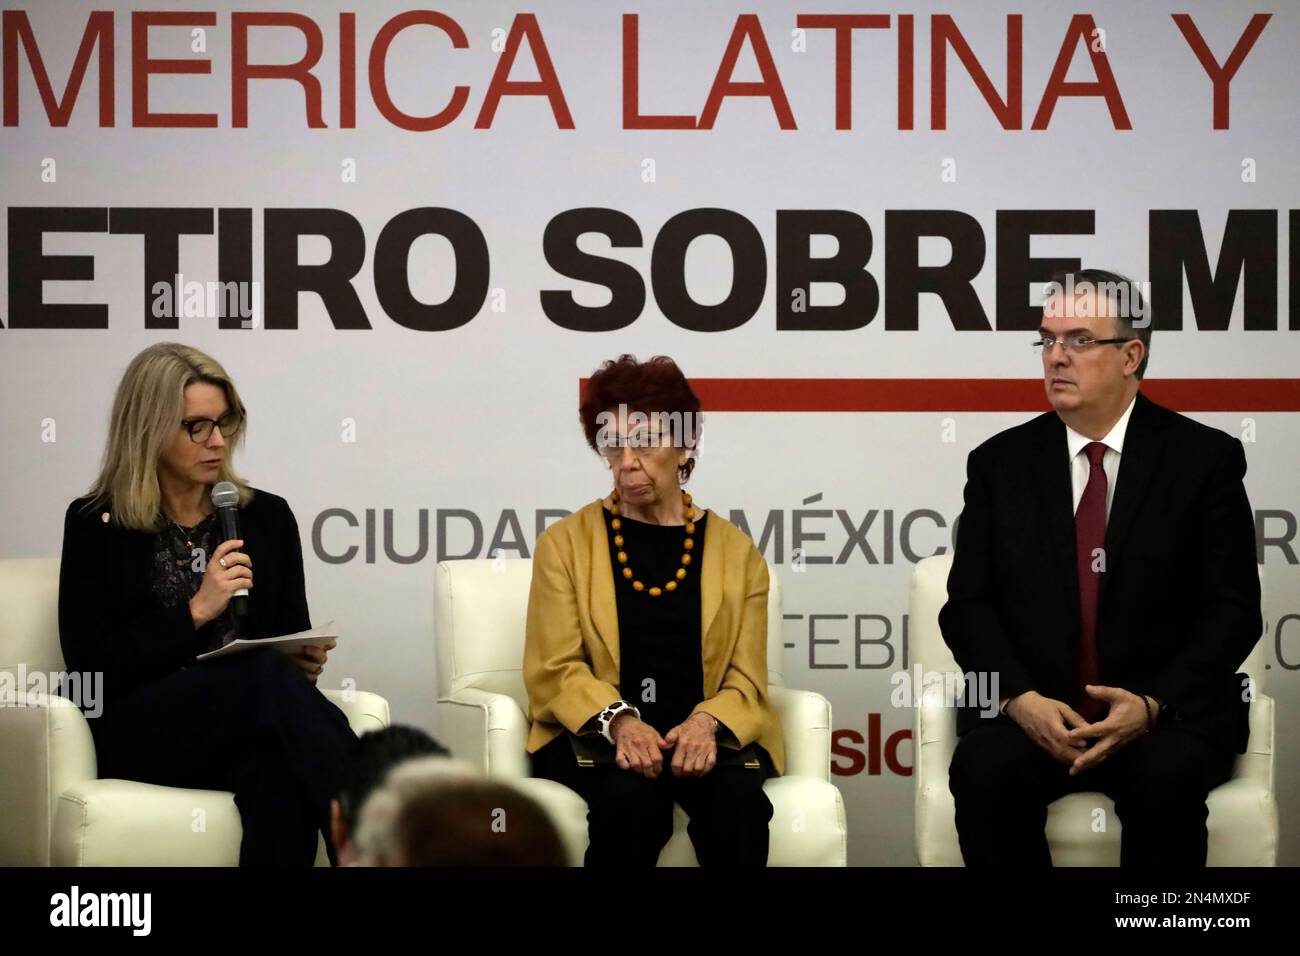 Mexico City, Mexico. 8th Feb, 2023. The Norwegian ambassador to Mexico, Ragnhild Imerslund; the Undersecretary of Foreign Relations of Mexico, Carmen Moreno Toscano and the Foreign Minister of Mexico, Marcelo Ebrard at the inauguration of the Retreat on Mediation 'Latin America and the Caribbean'' at the Ministry of Foreign Relations in Mexico City. Credit: ZUMA Press, Inc./Alamy Live News Stock Photo